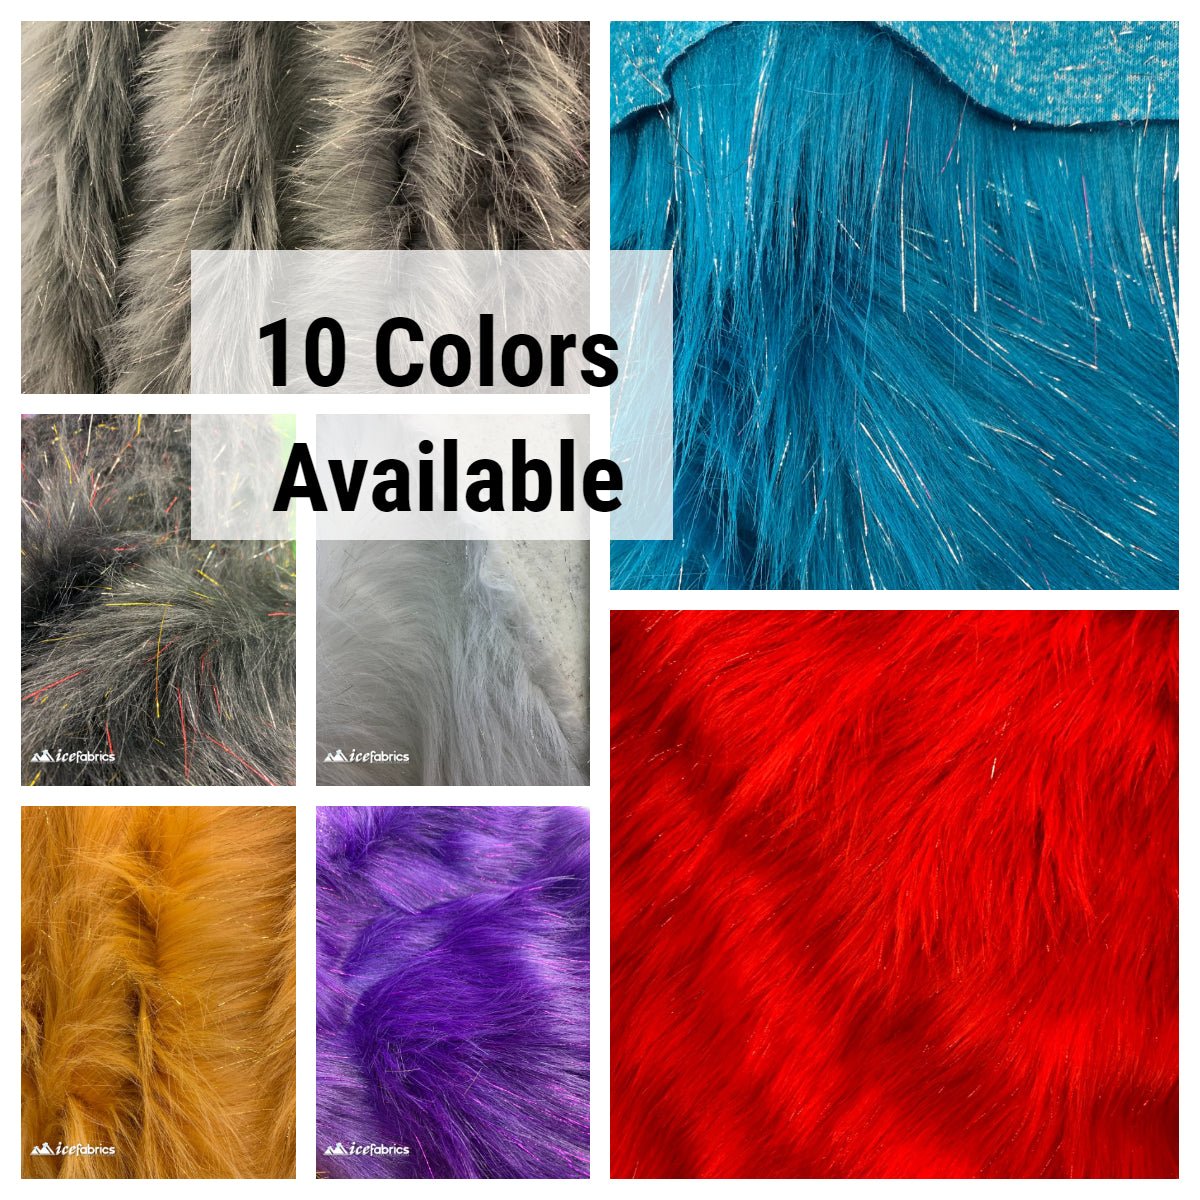 Tinsel Long Pile Mongolian Faux Fur Fabric By The Yard Fashion FabricICEFABRICICE FABRICSPurpleBy The Yard (60 inches Wide)Tinsel Long Pile Mongolian Faux Fur Fabric By The Yard Fashion Fabric ICEFABRIC